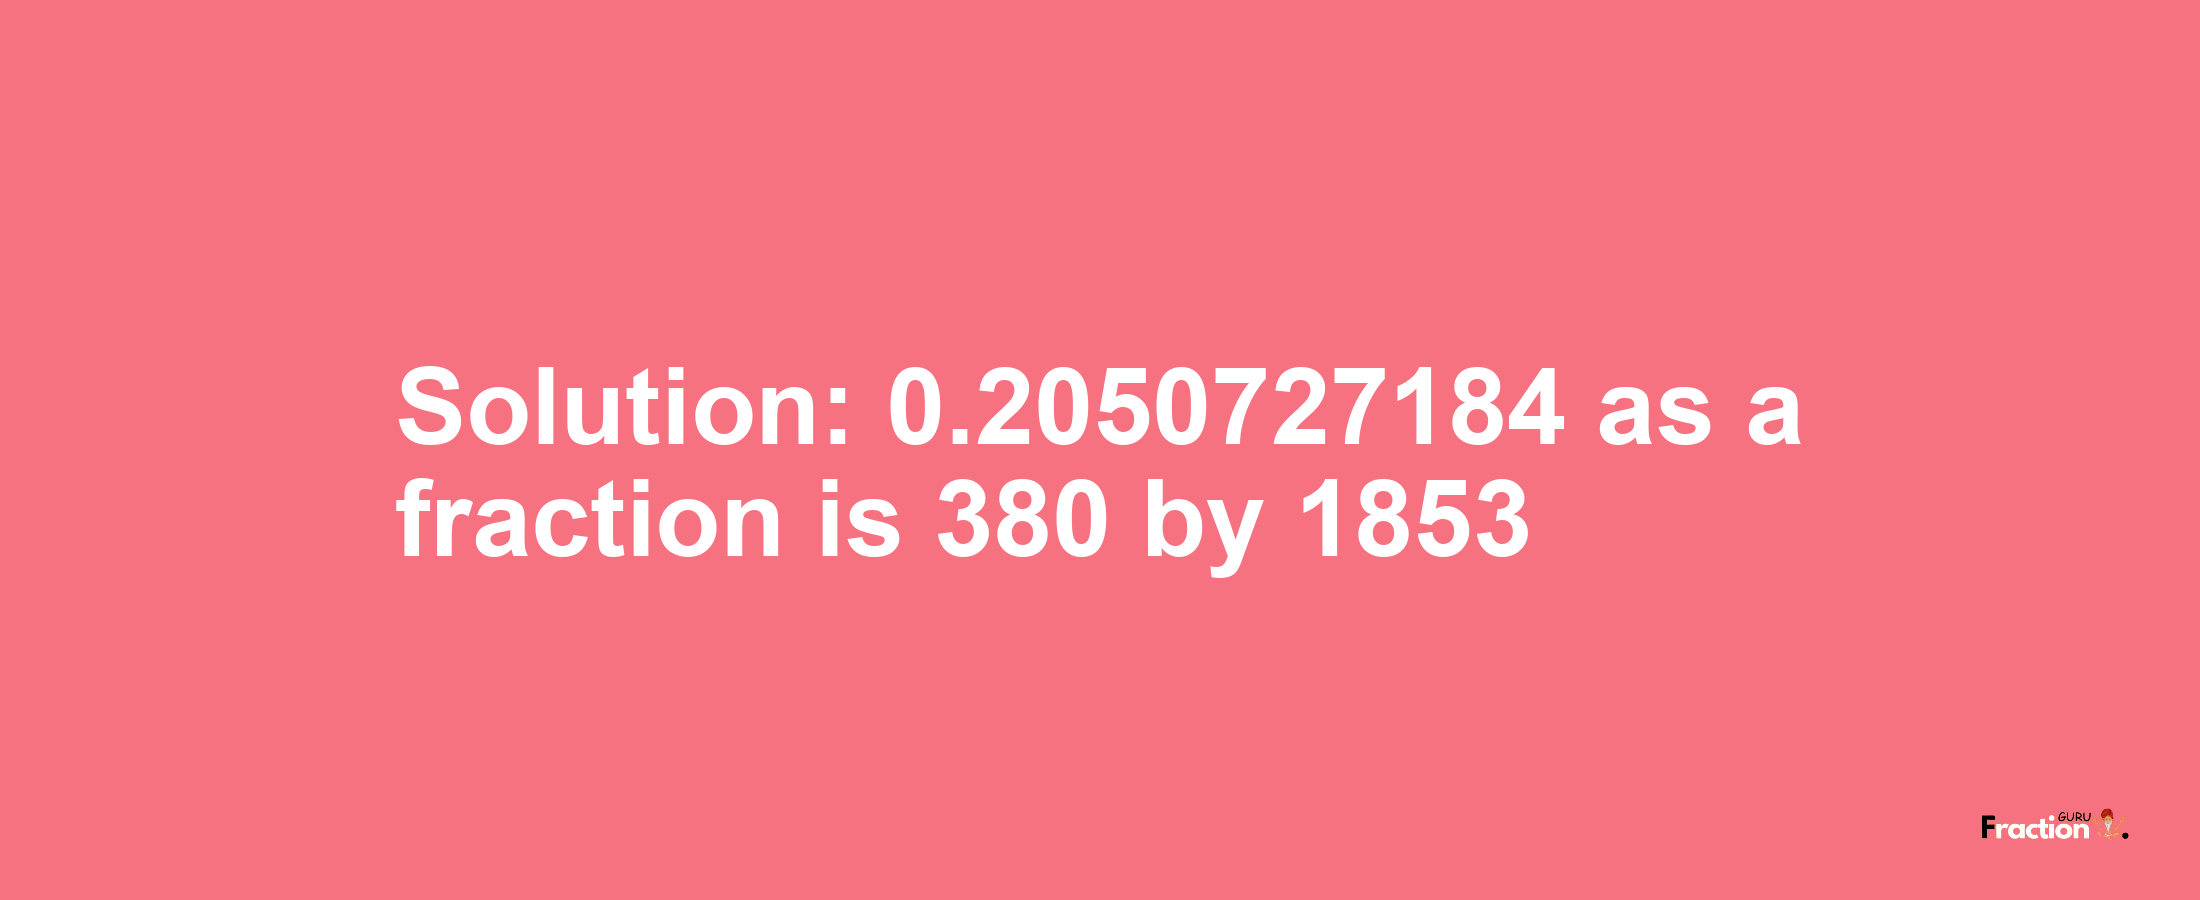 Solution:0.2050727184 as a fraction is 380/1853